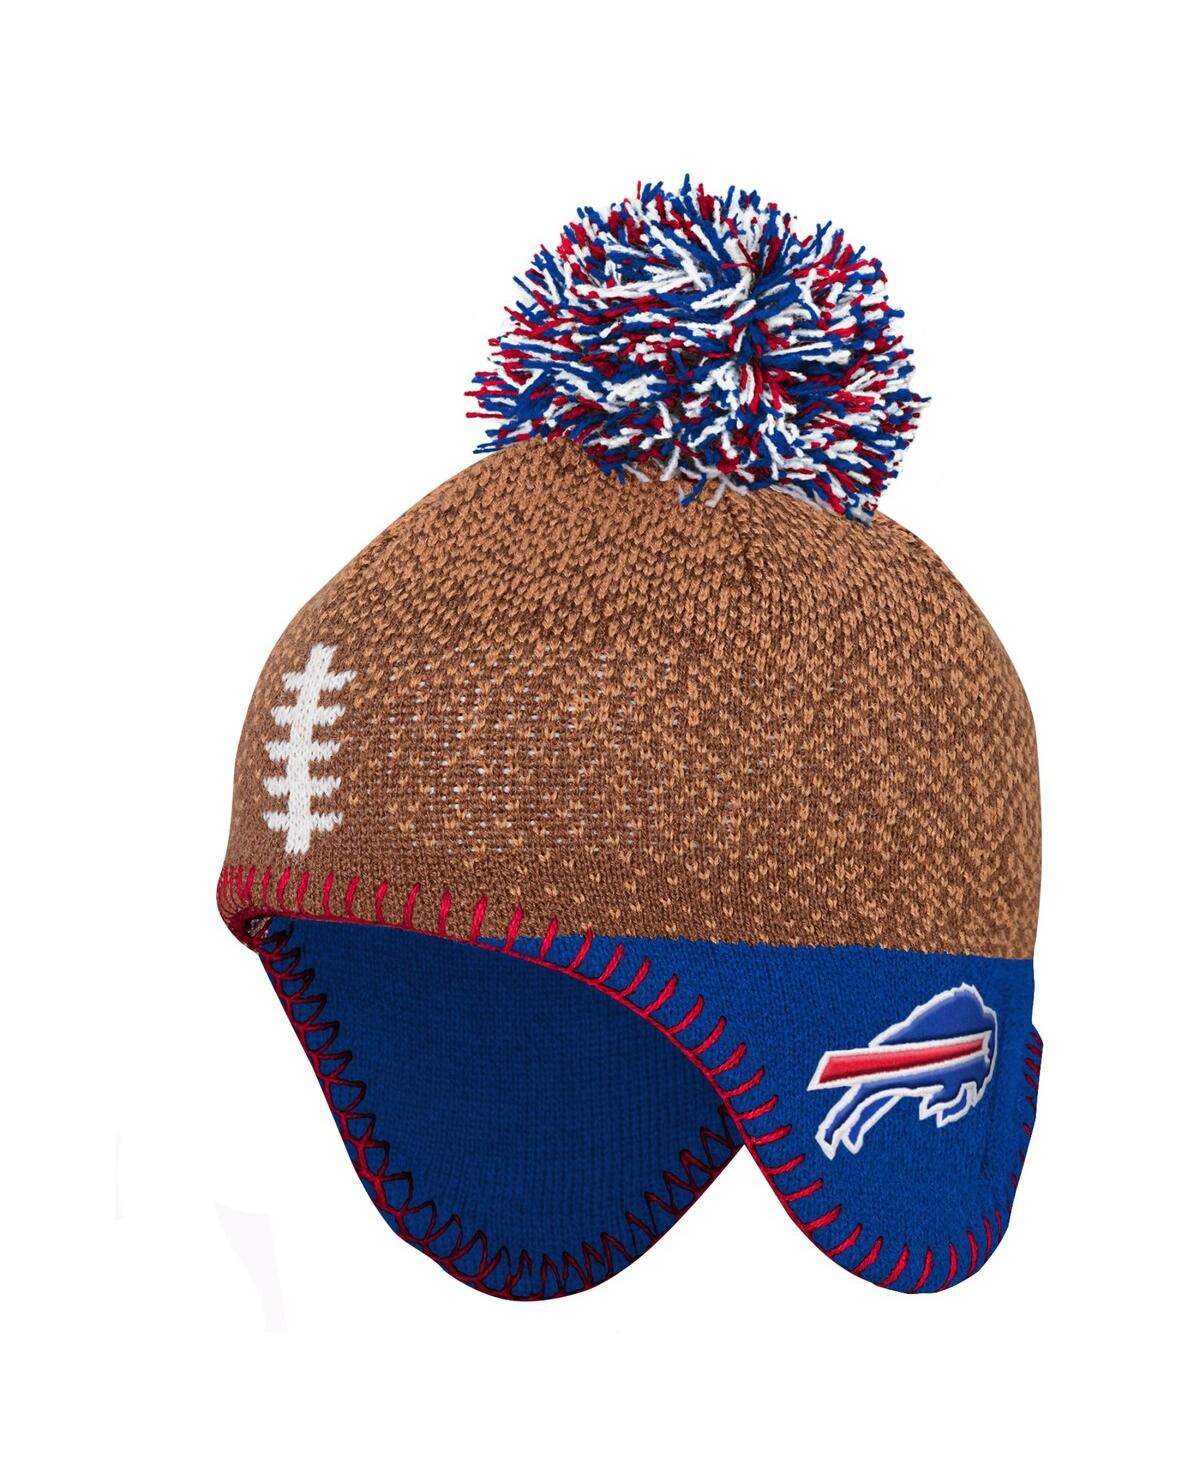 Outerstuff Babies' Infant Boys And Girls Brown Buffalo Bills Football Head Knit Hat With Pom